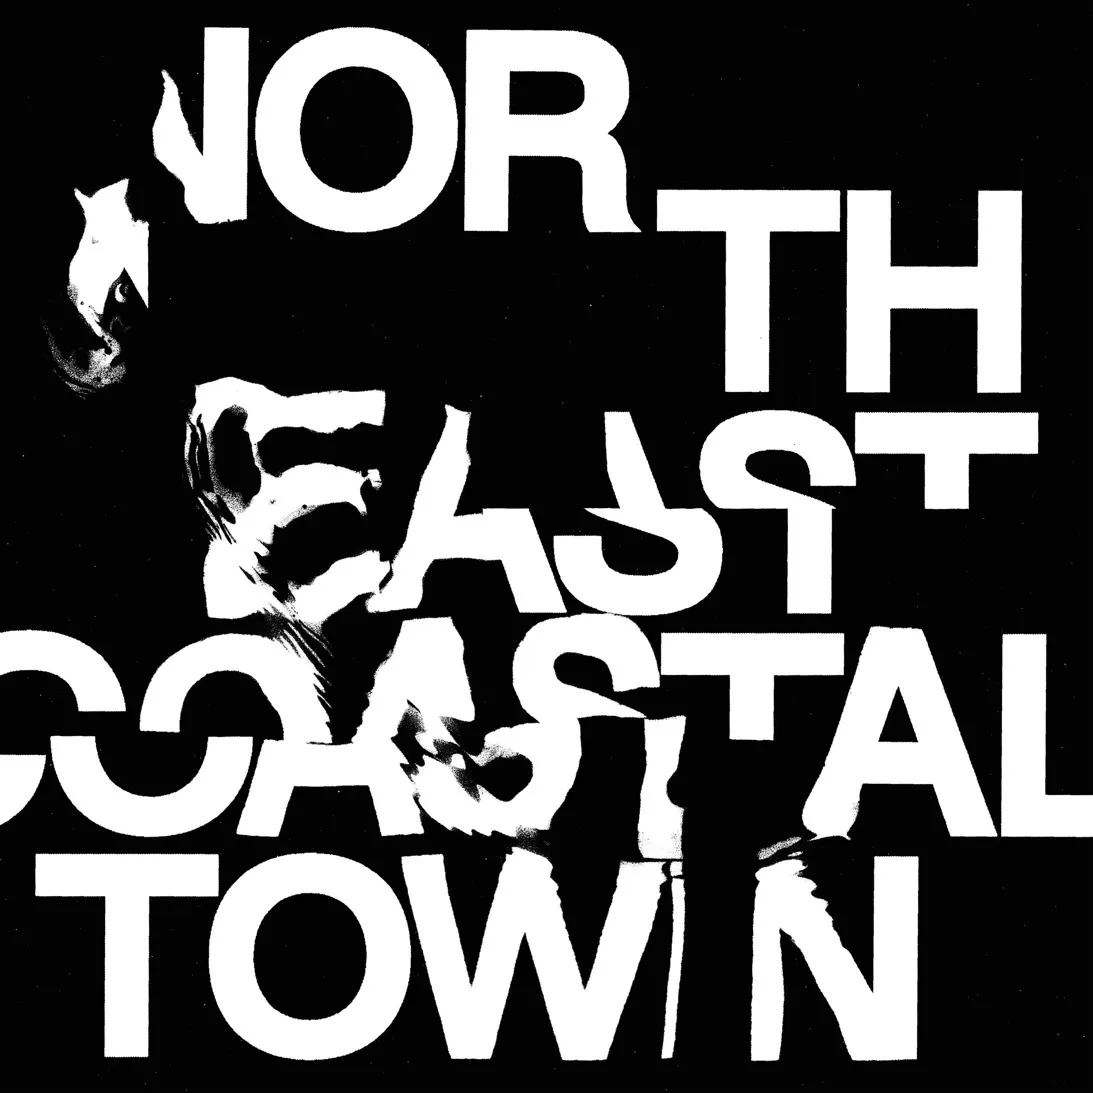 <strong>LIFE - North East Coastal Town</strong> (Vinyl LP - black)